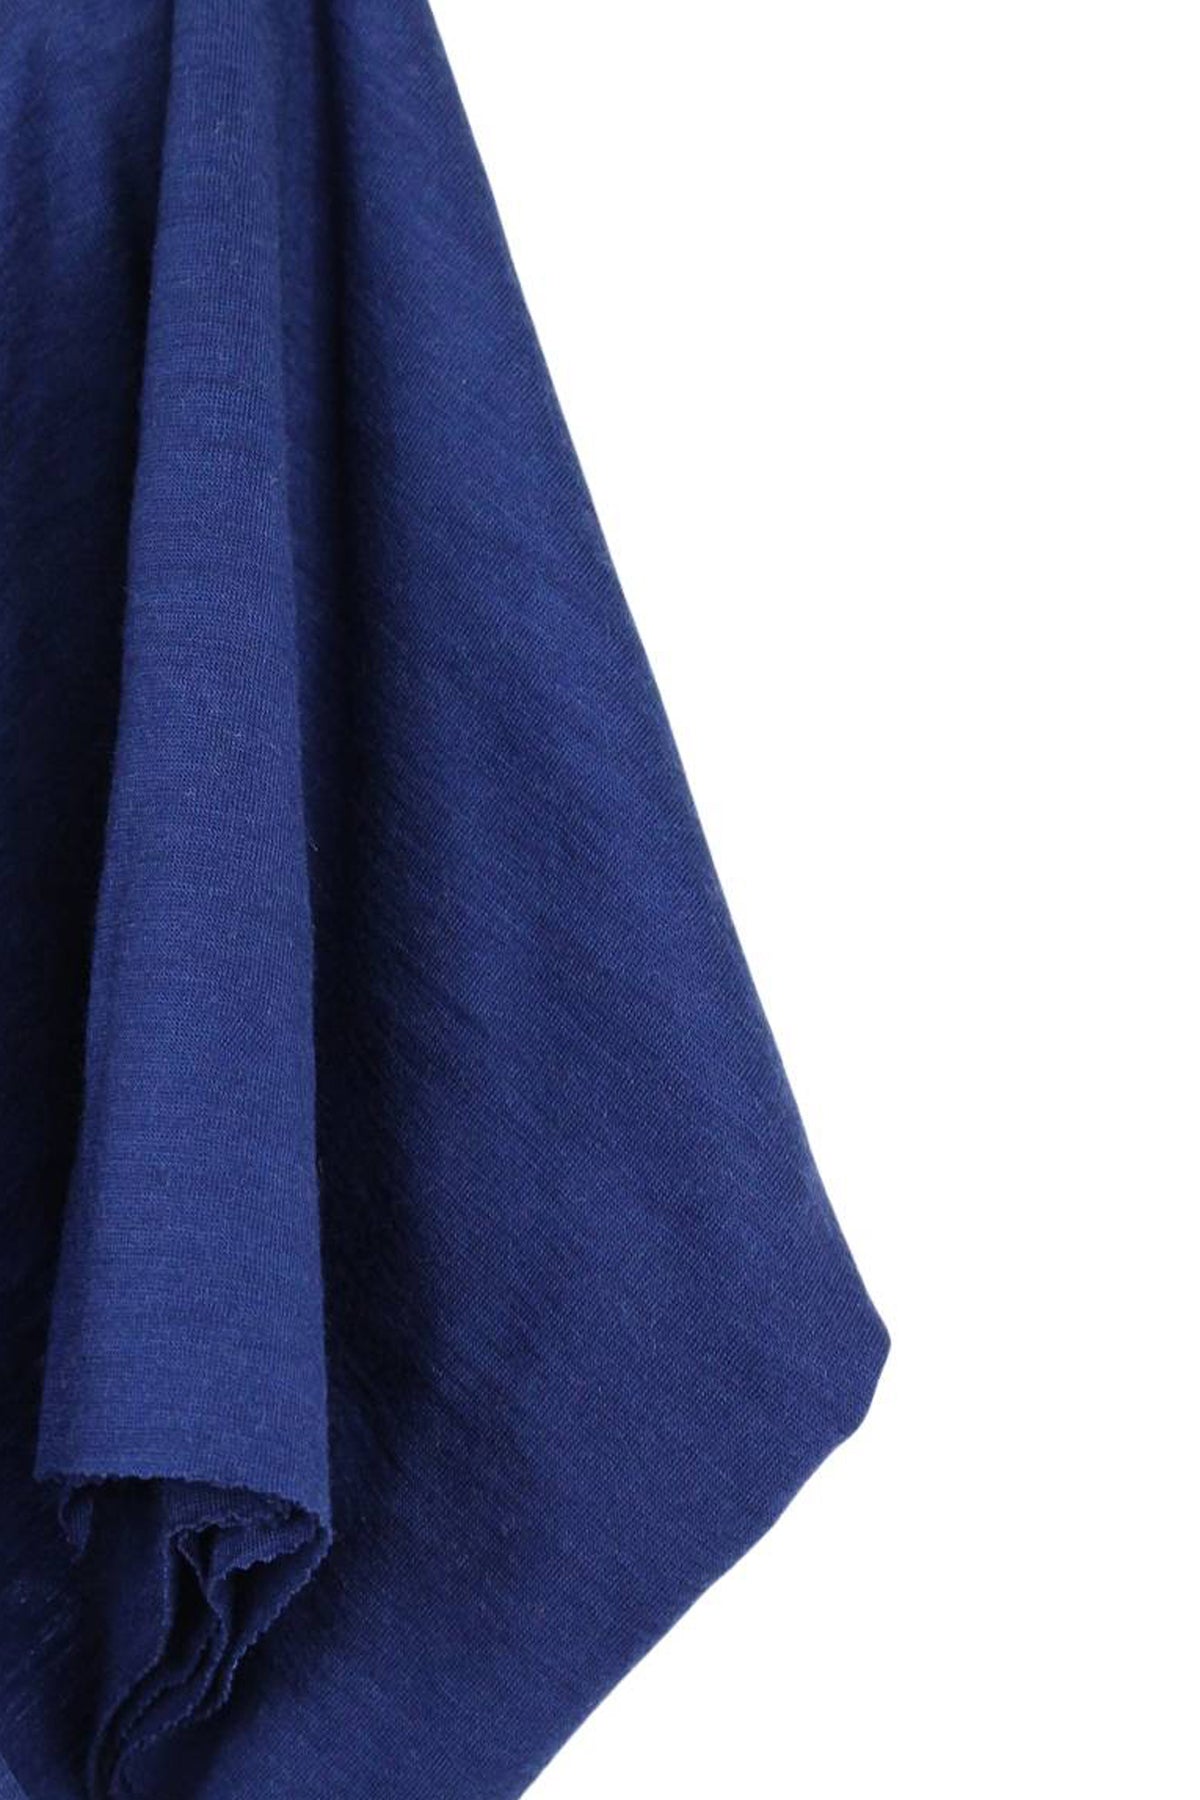 Wholesale 4 way stretch microfiber fabric For A Wide Variety Of